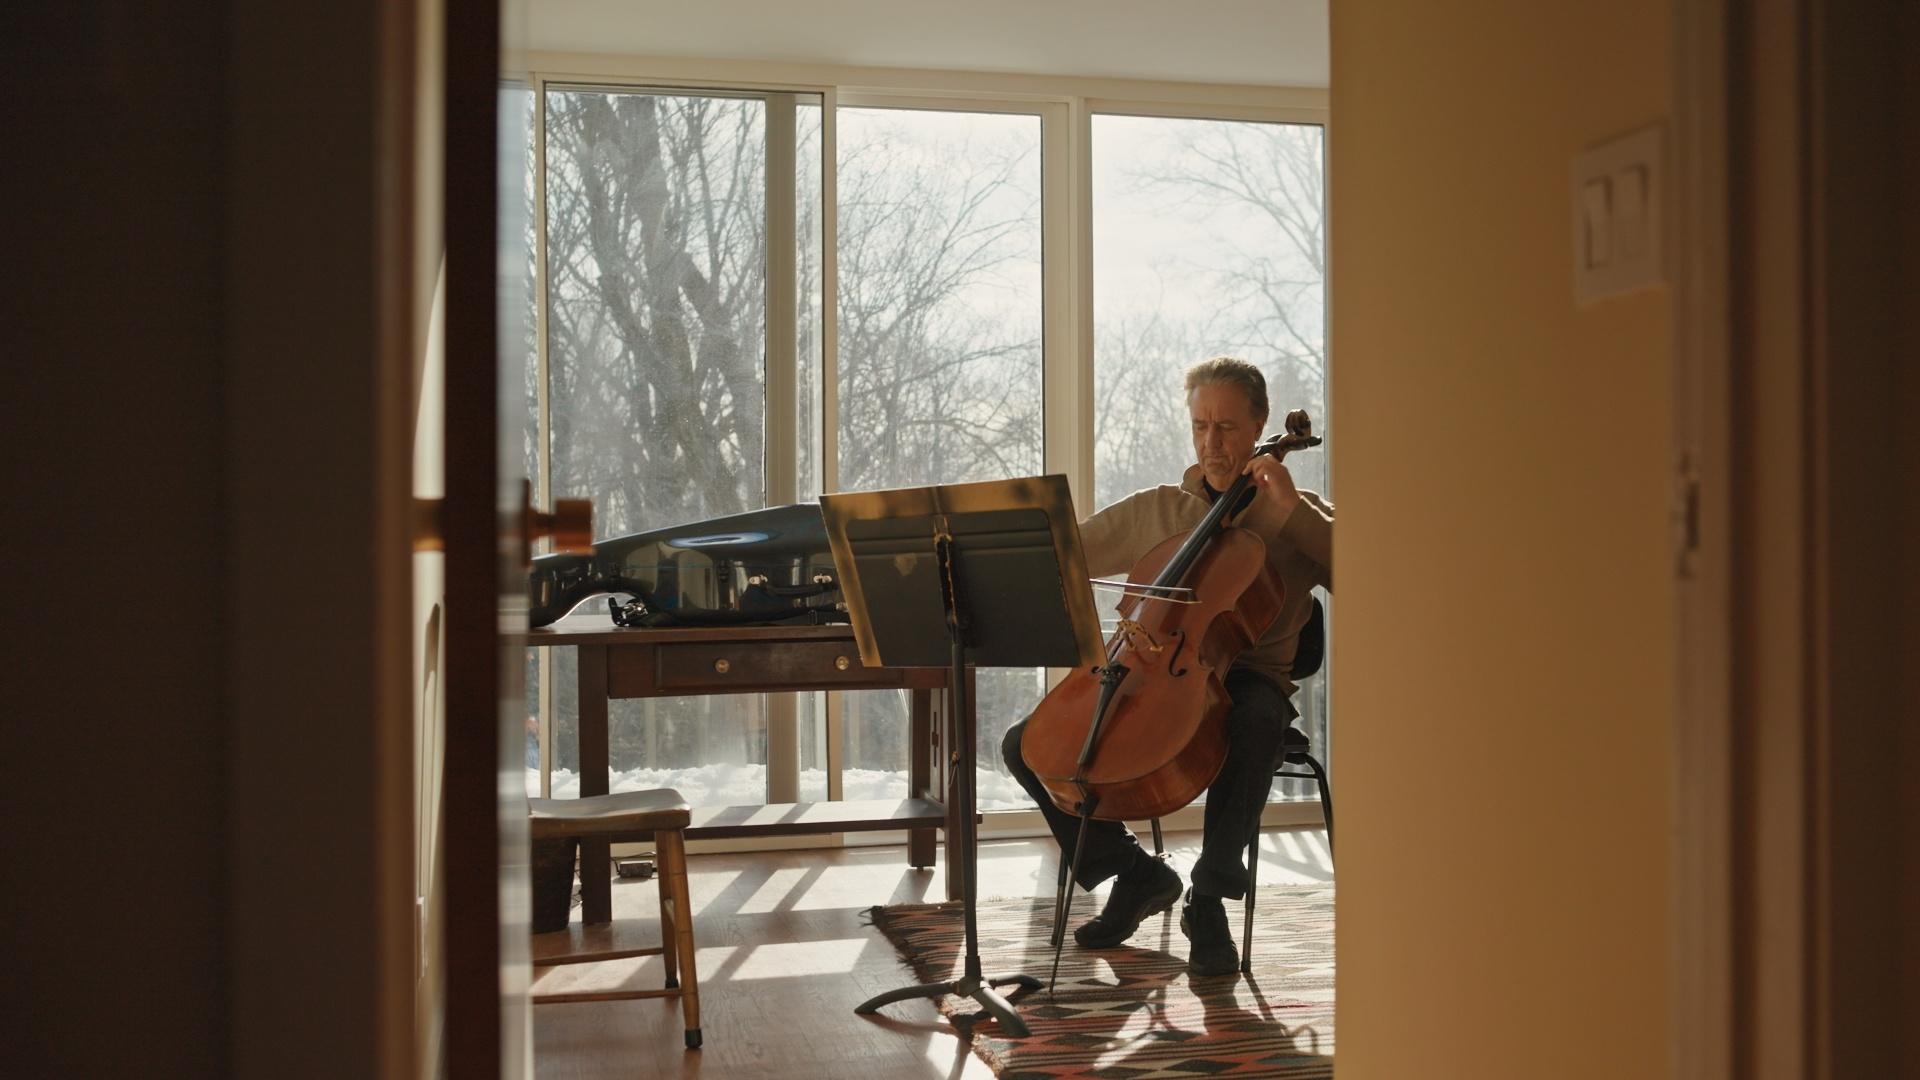 Cellist David Finckel, co-artistic director of Chamber Music Society of Lincoln Center.